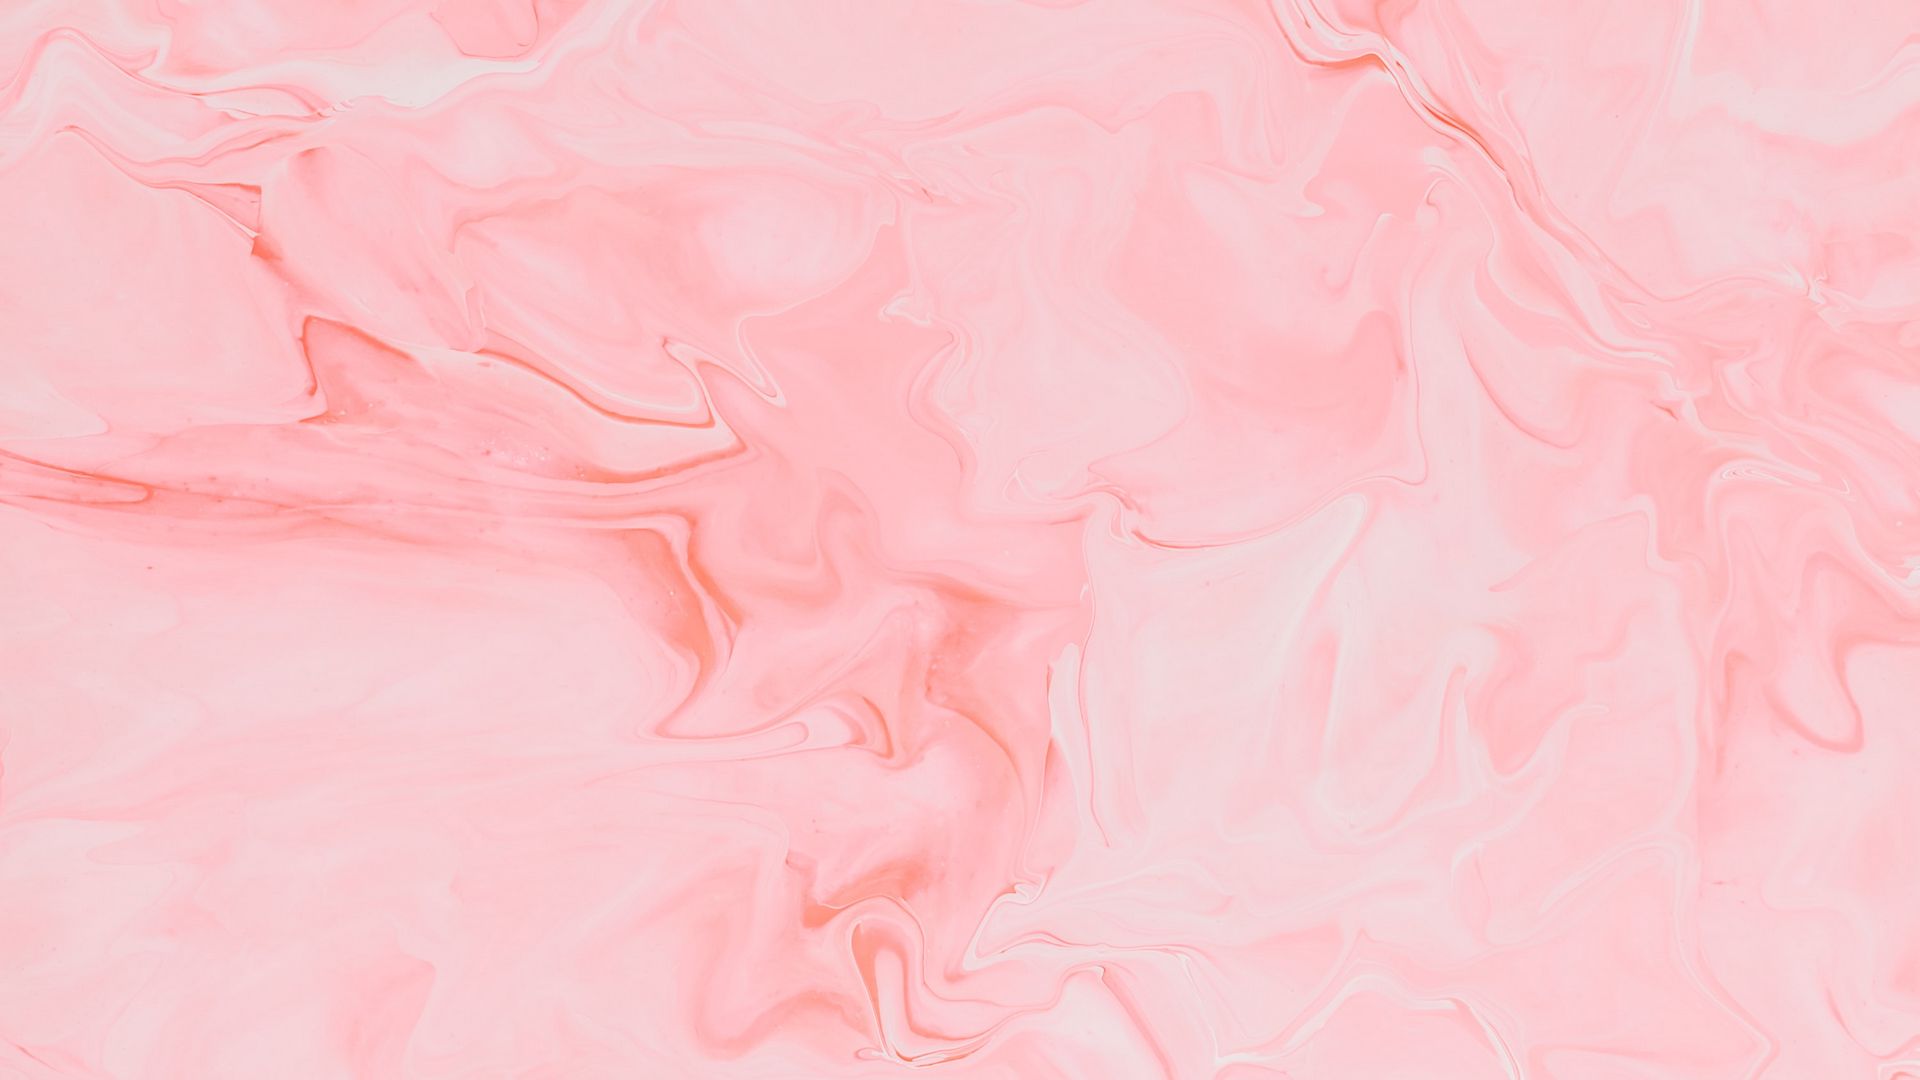 Download wallpaper 1920x1080 paint, liquid, stains, pink, abstract full ...